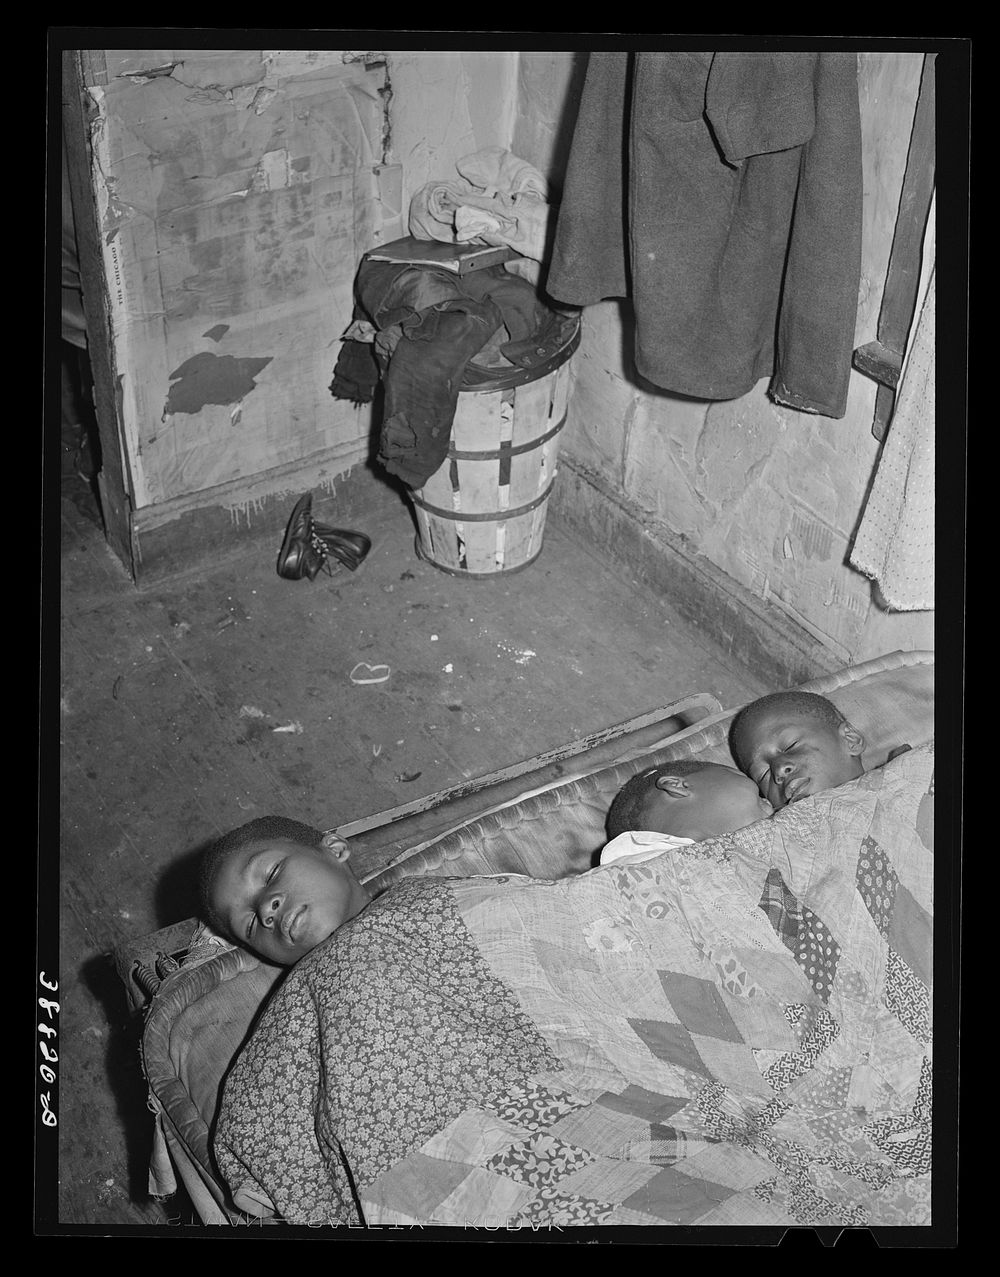  children asleep. Southside of Chicago, Illinois by Russell Lee